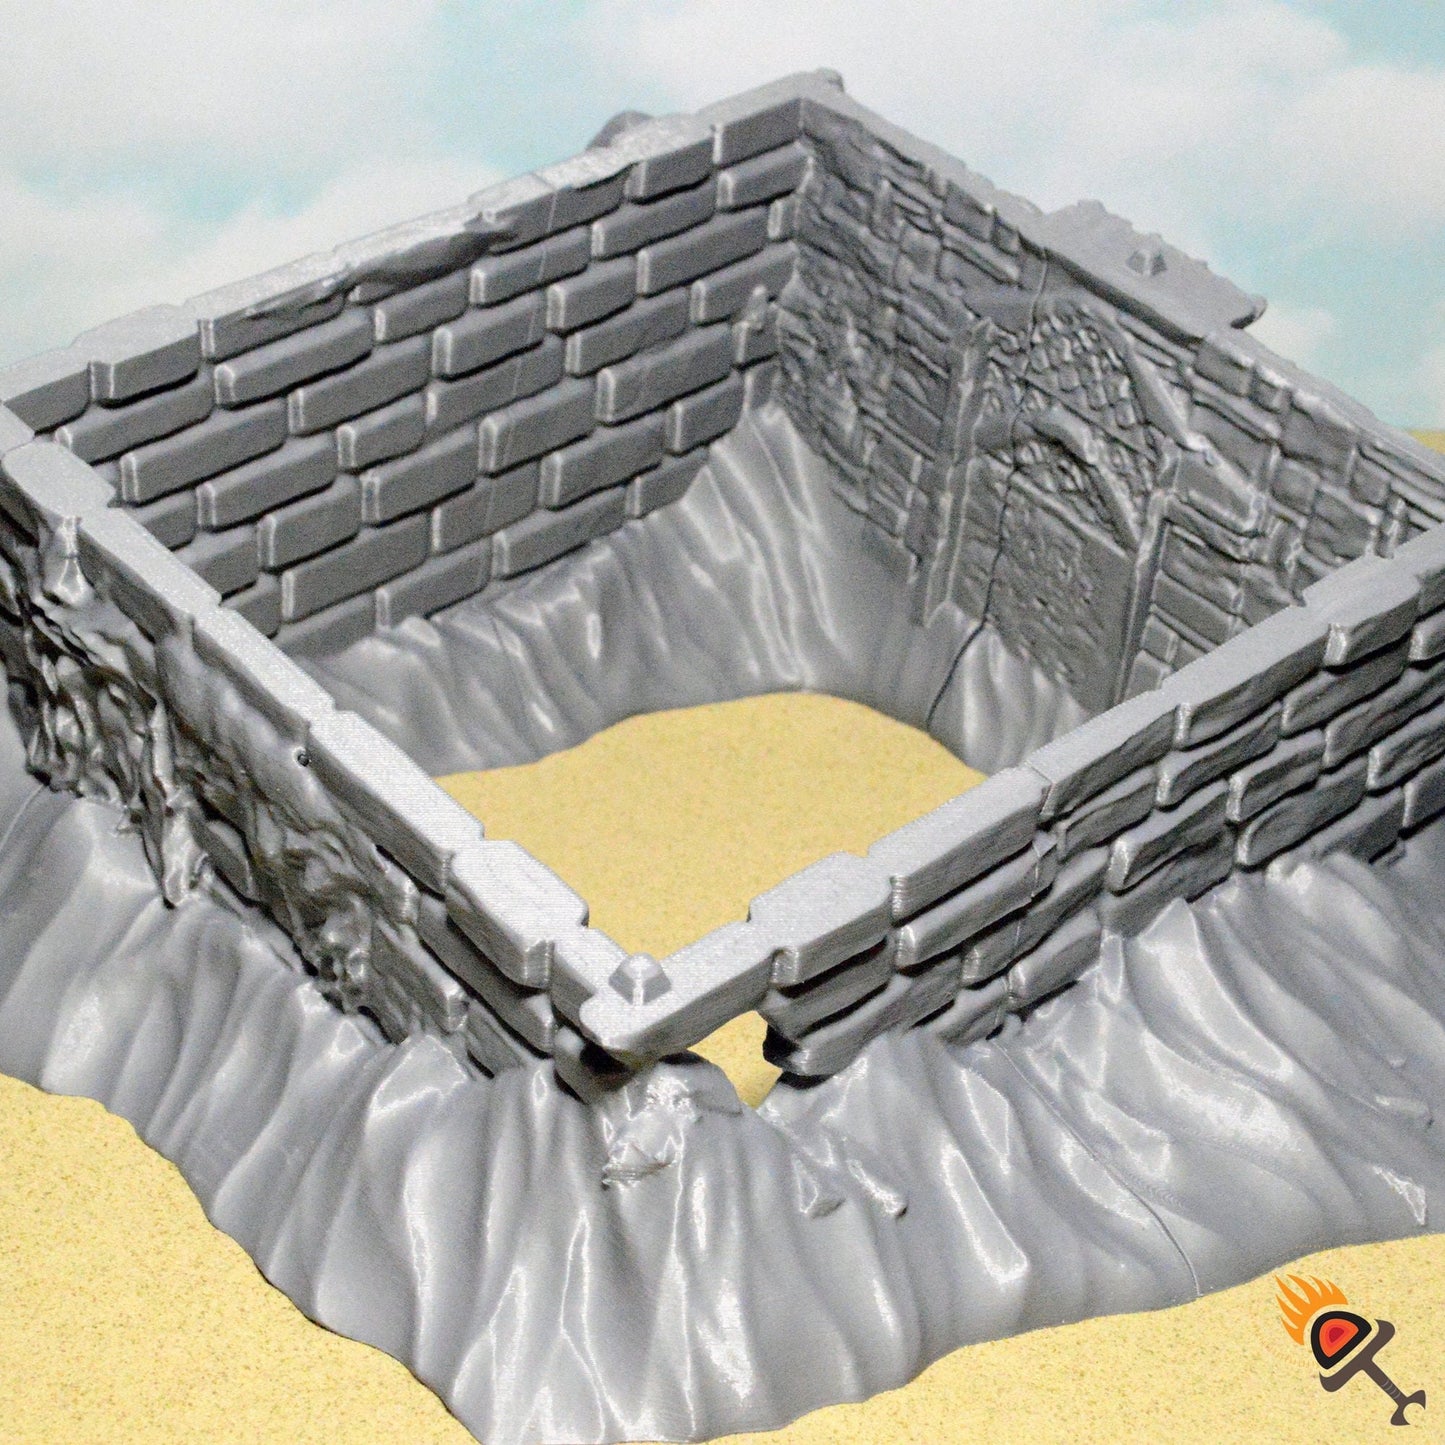 Sinking Tomb 15mm 28mm 32mm for D&D Terrain, DnD Pathfinder Ancient Tomb, Empire of Scorching Sands